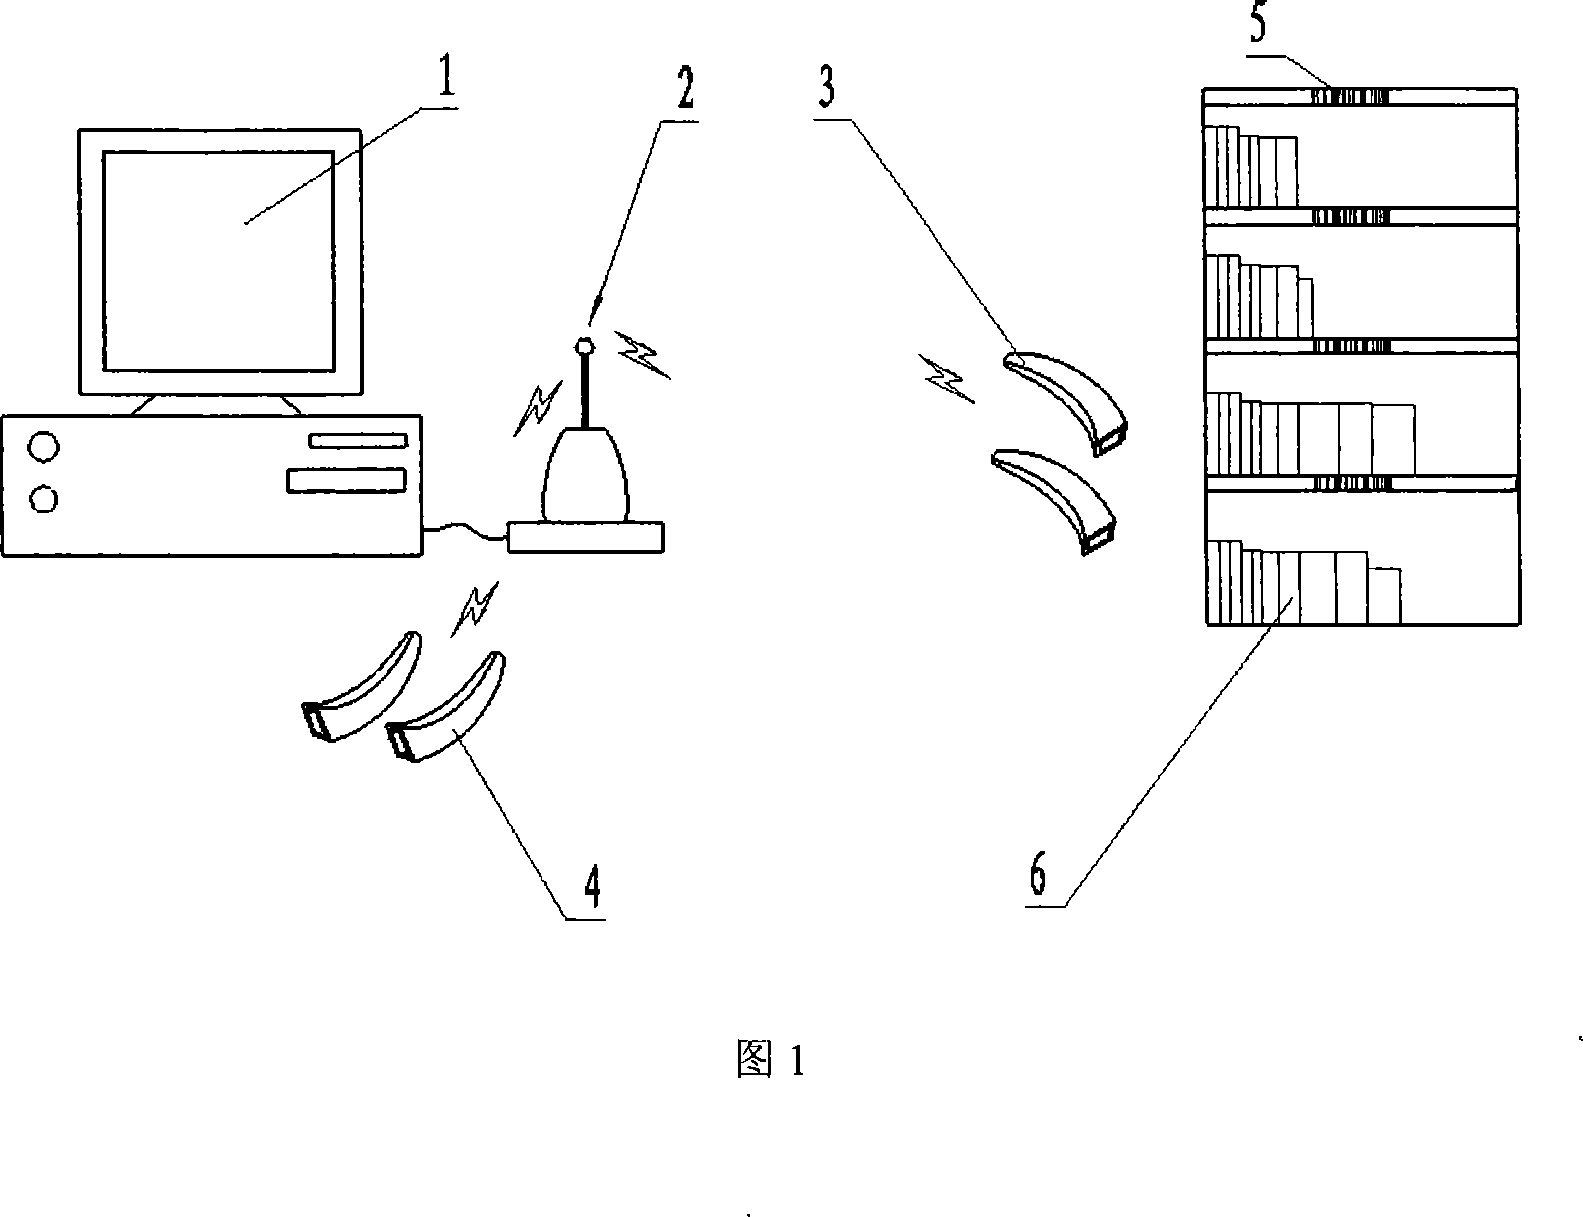 Storing article precise position information retrieving system and method